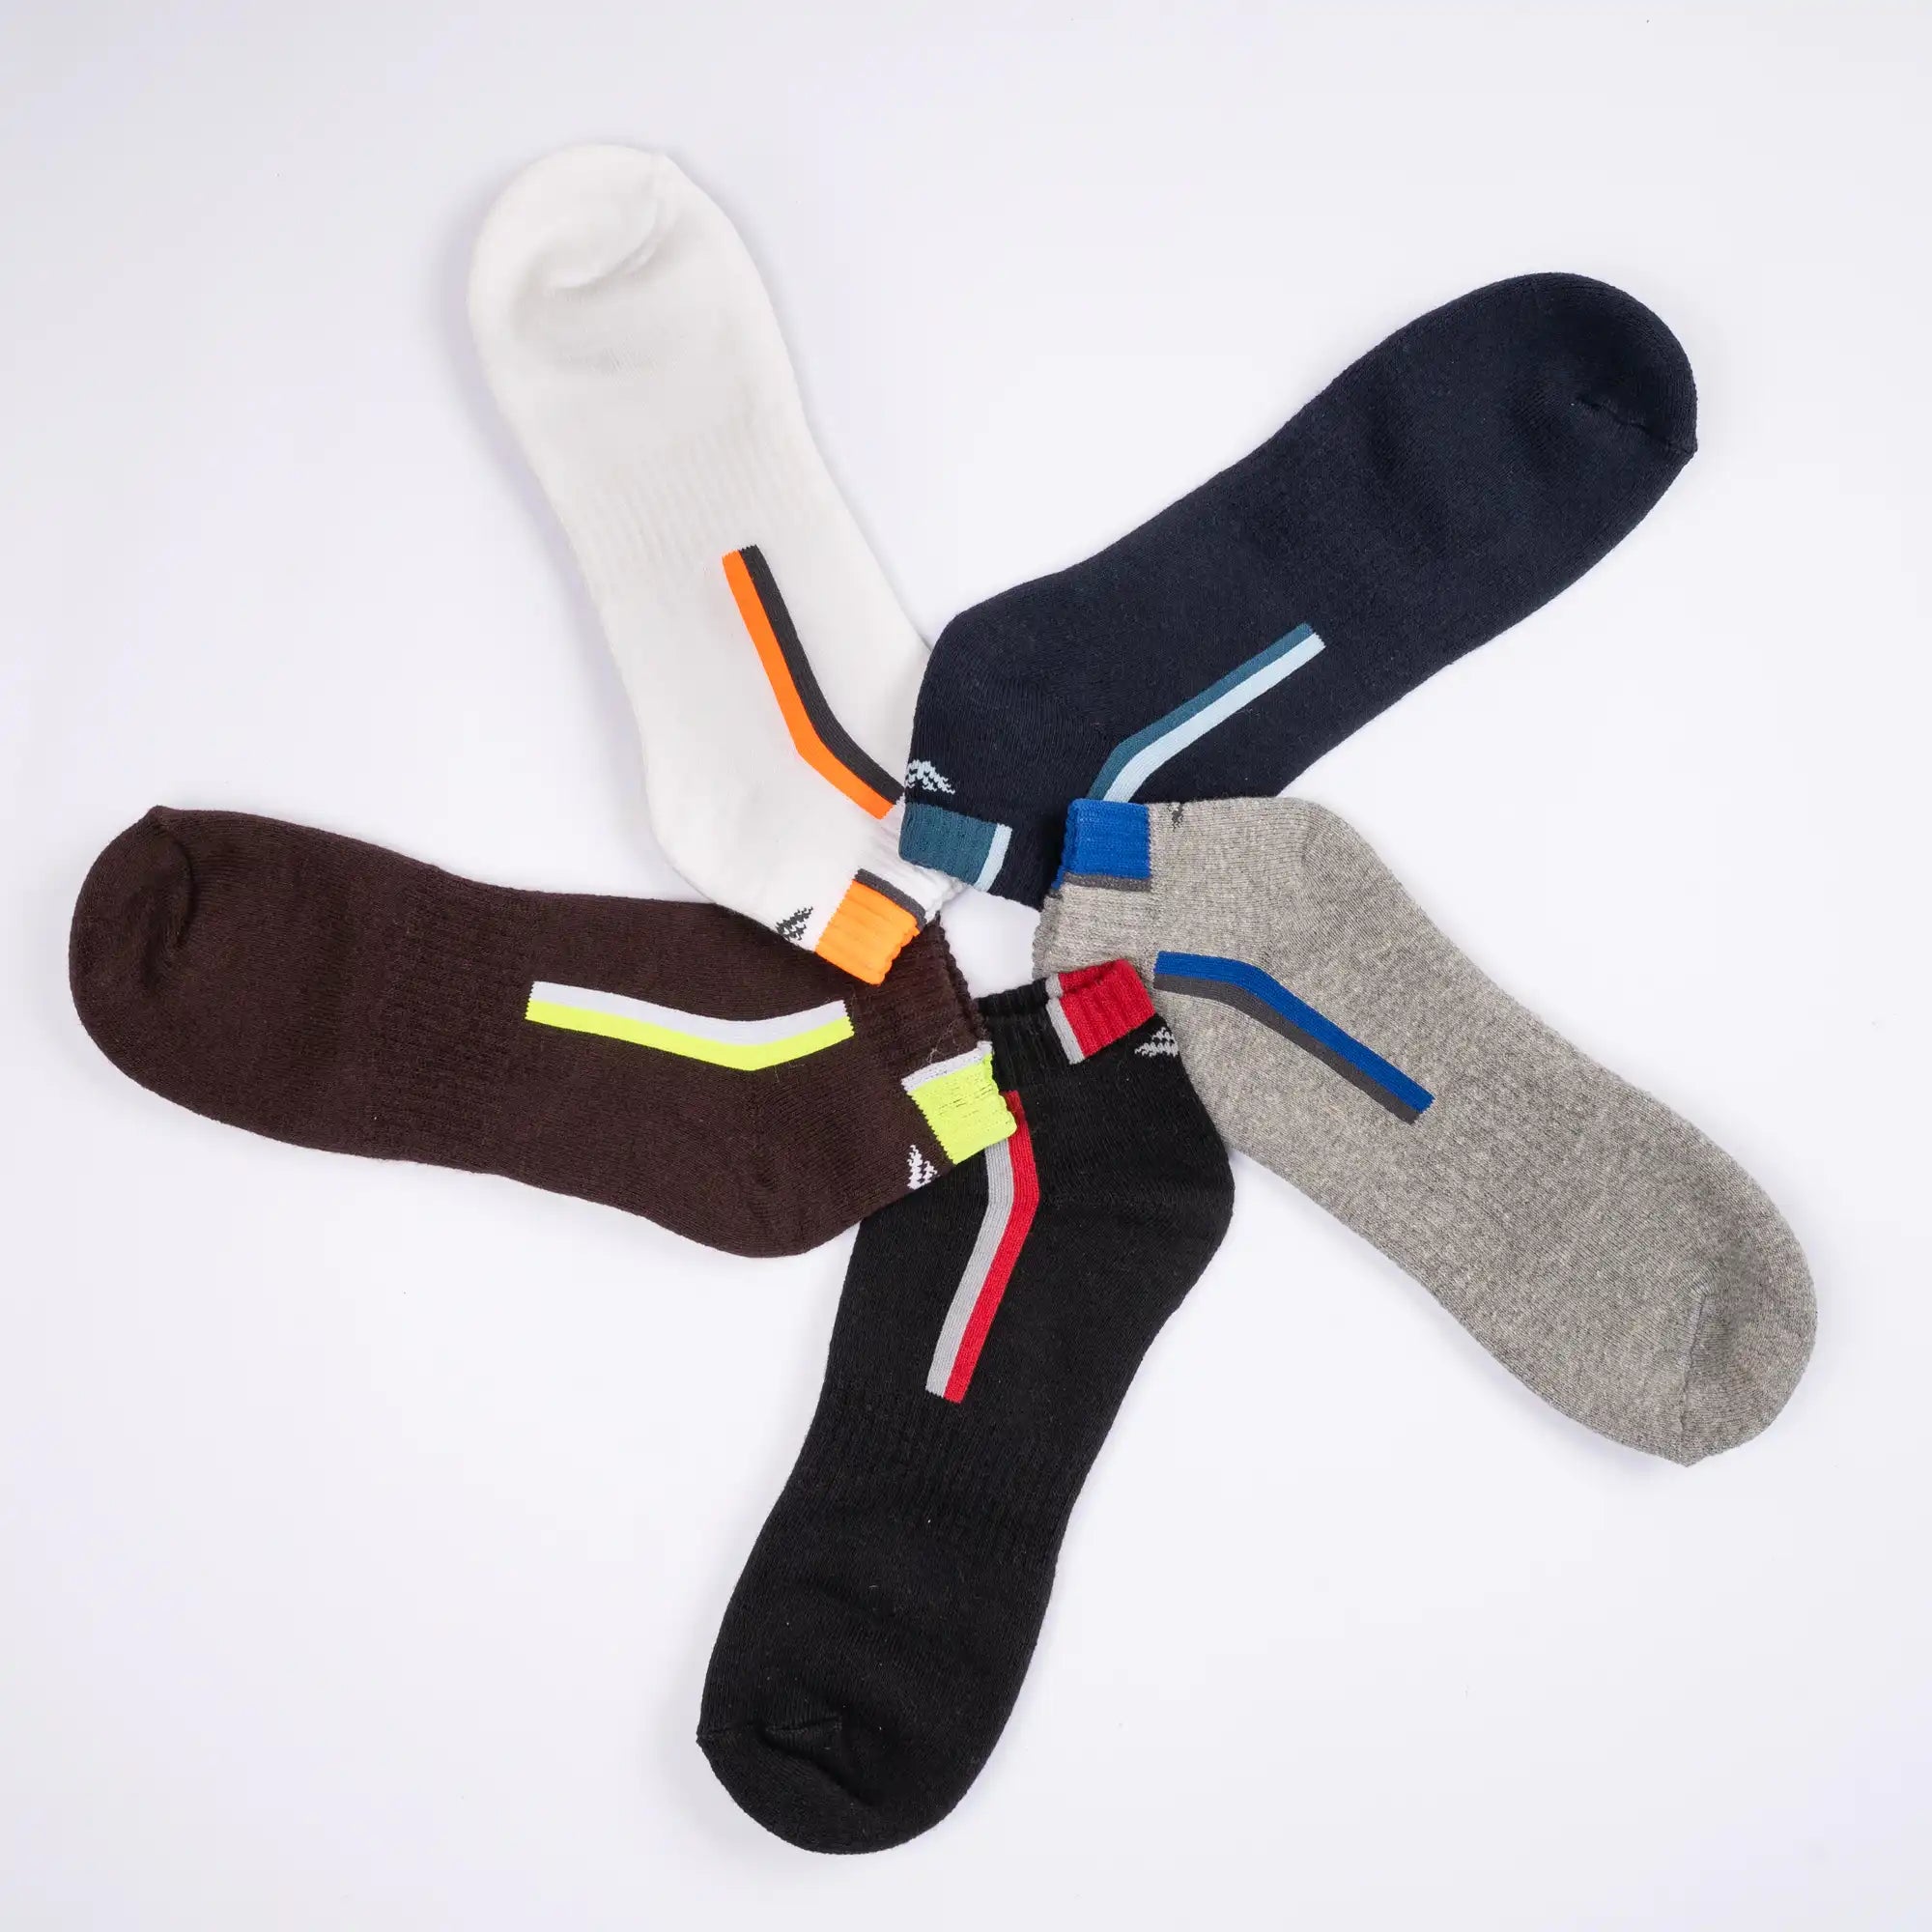 Young Wings Men's Multi Colour Cotton Fabric Design Low Ankle Length Socks - Pack of 3, Style no. 1606-M1